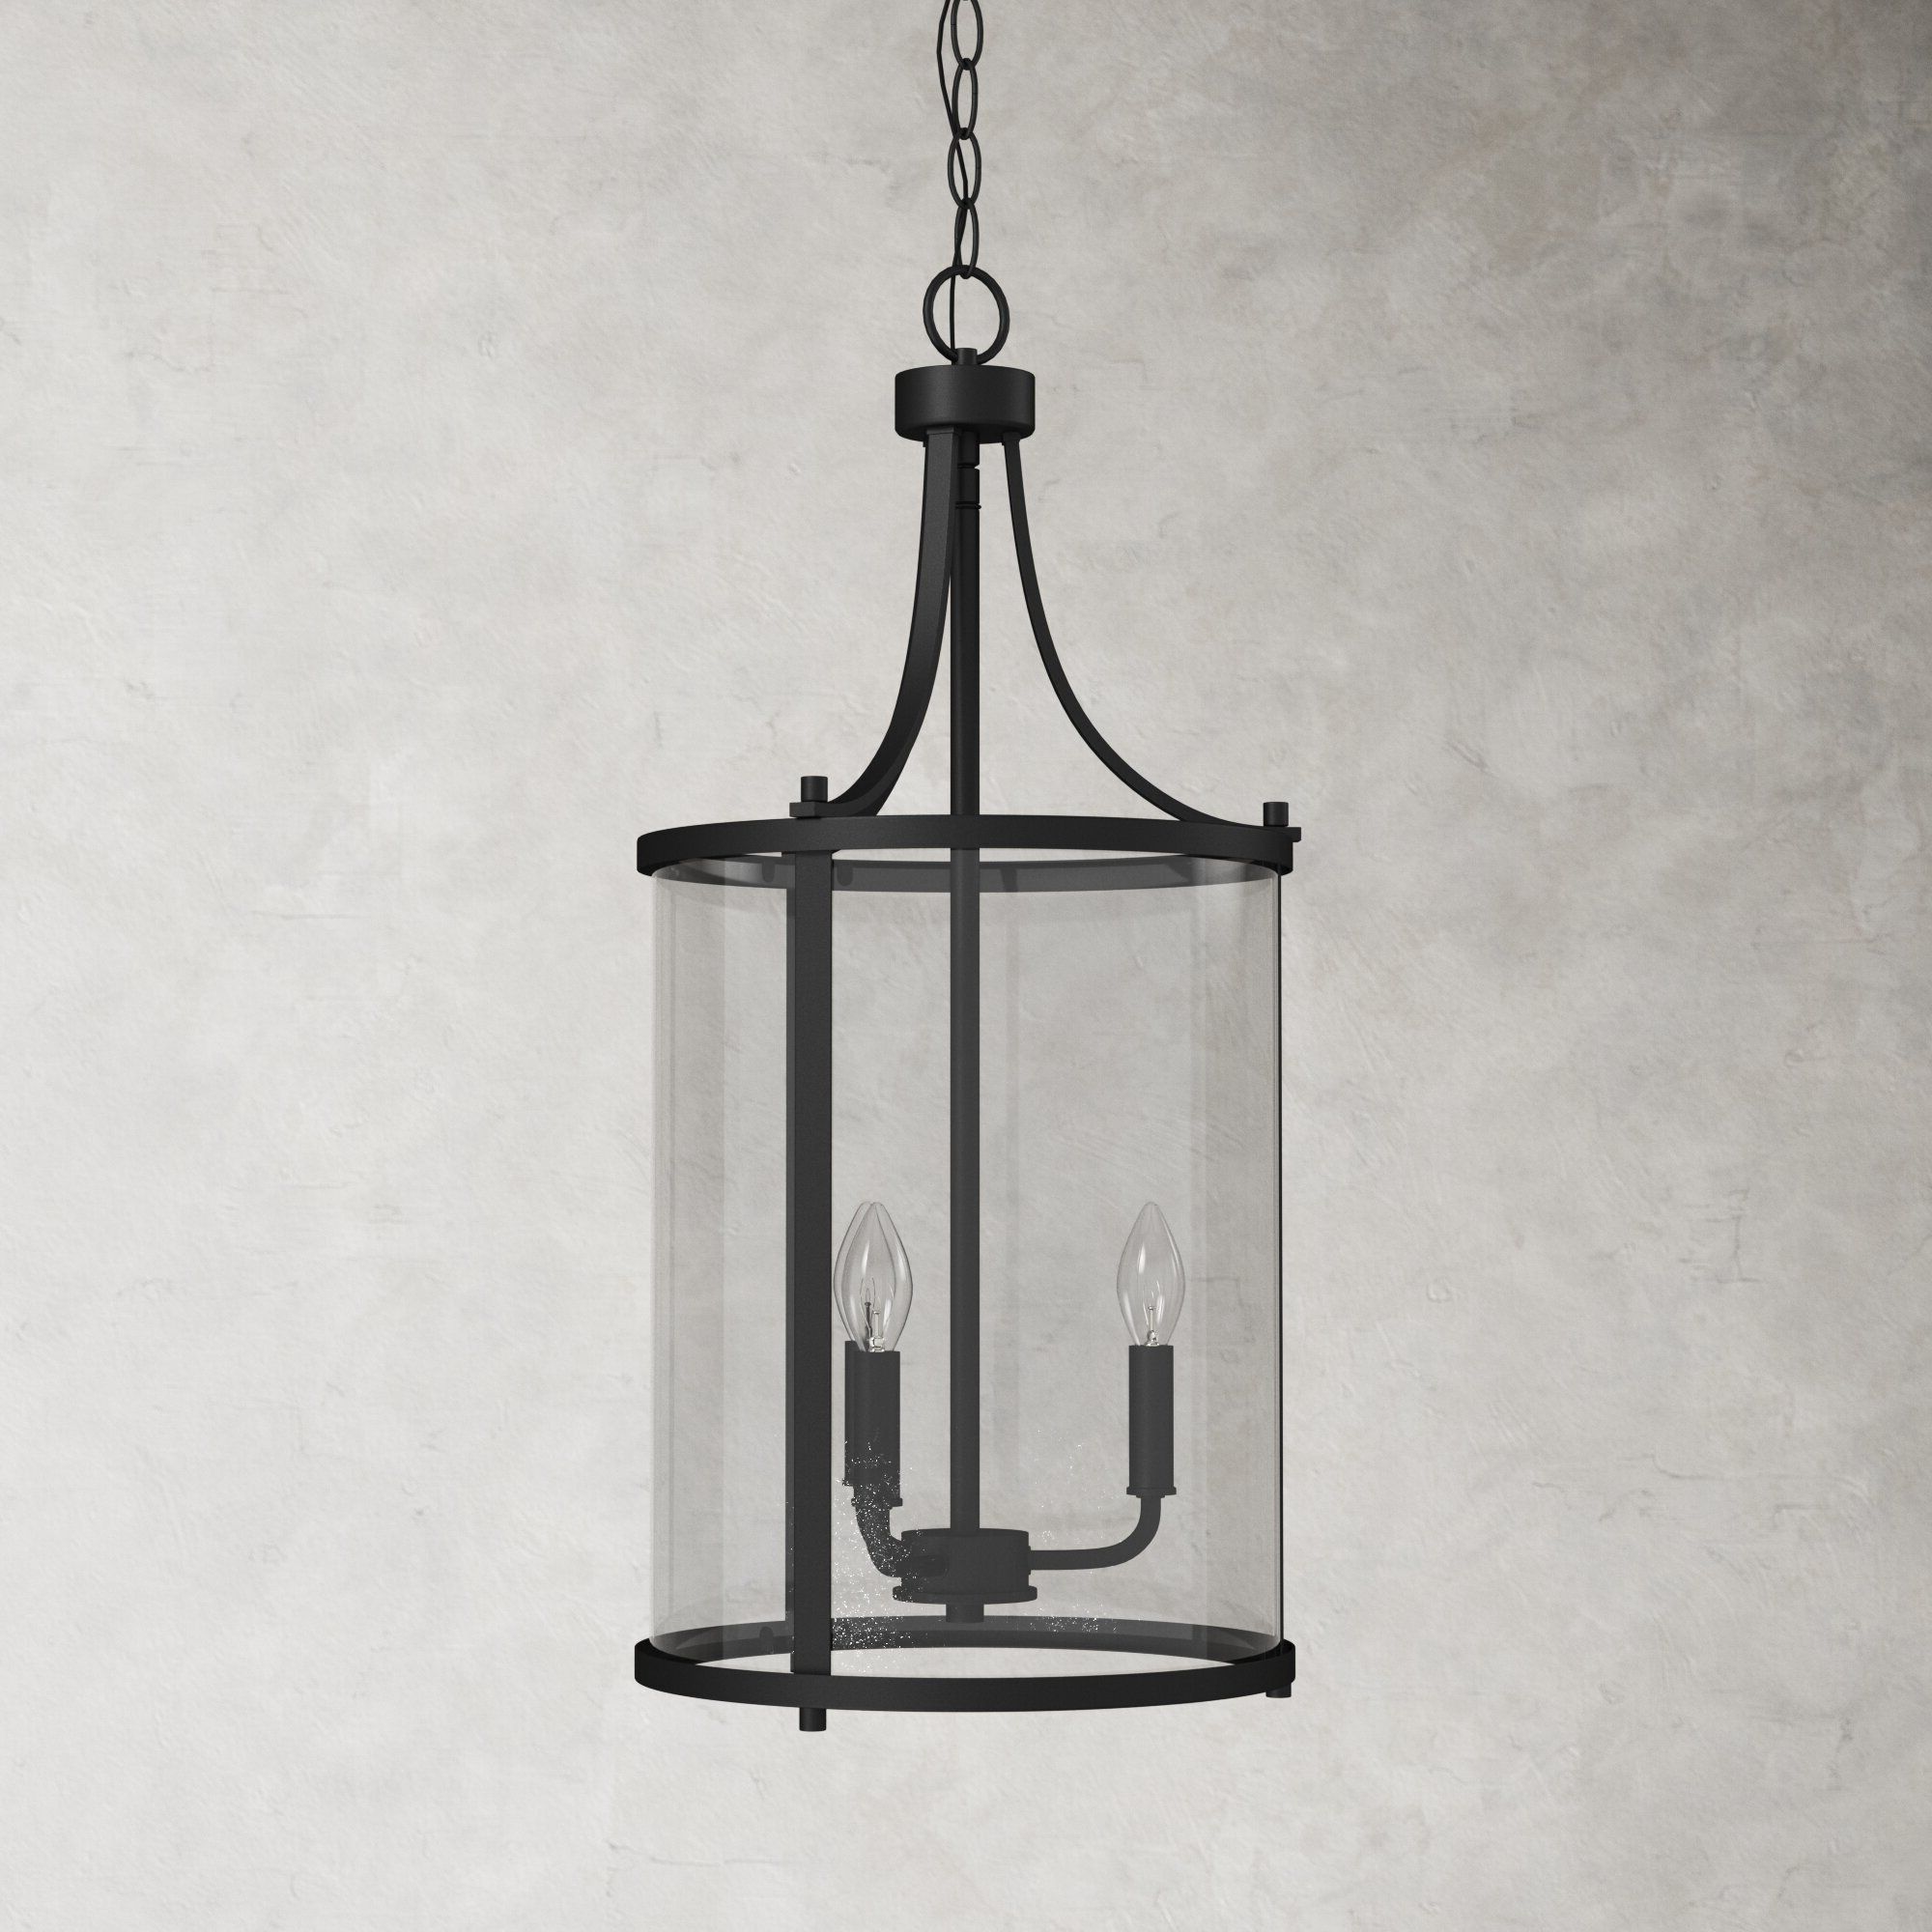 Black Finish Lantern Chandeliers You'll Love In 2022 For Widely Used Black With White Lantern Chandeliers (View 7 of 10)